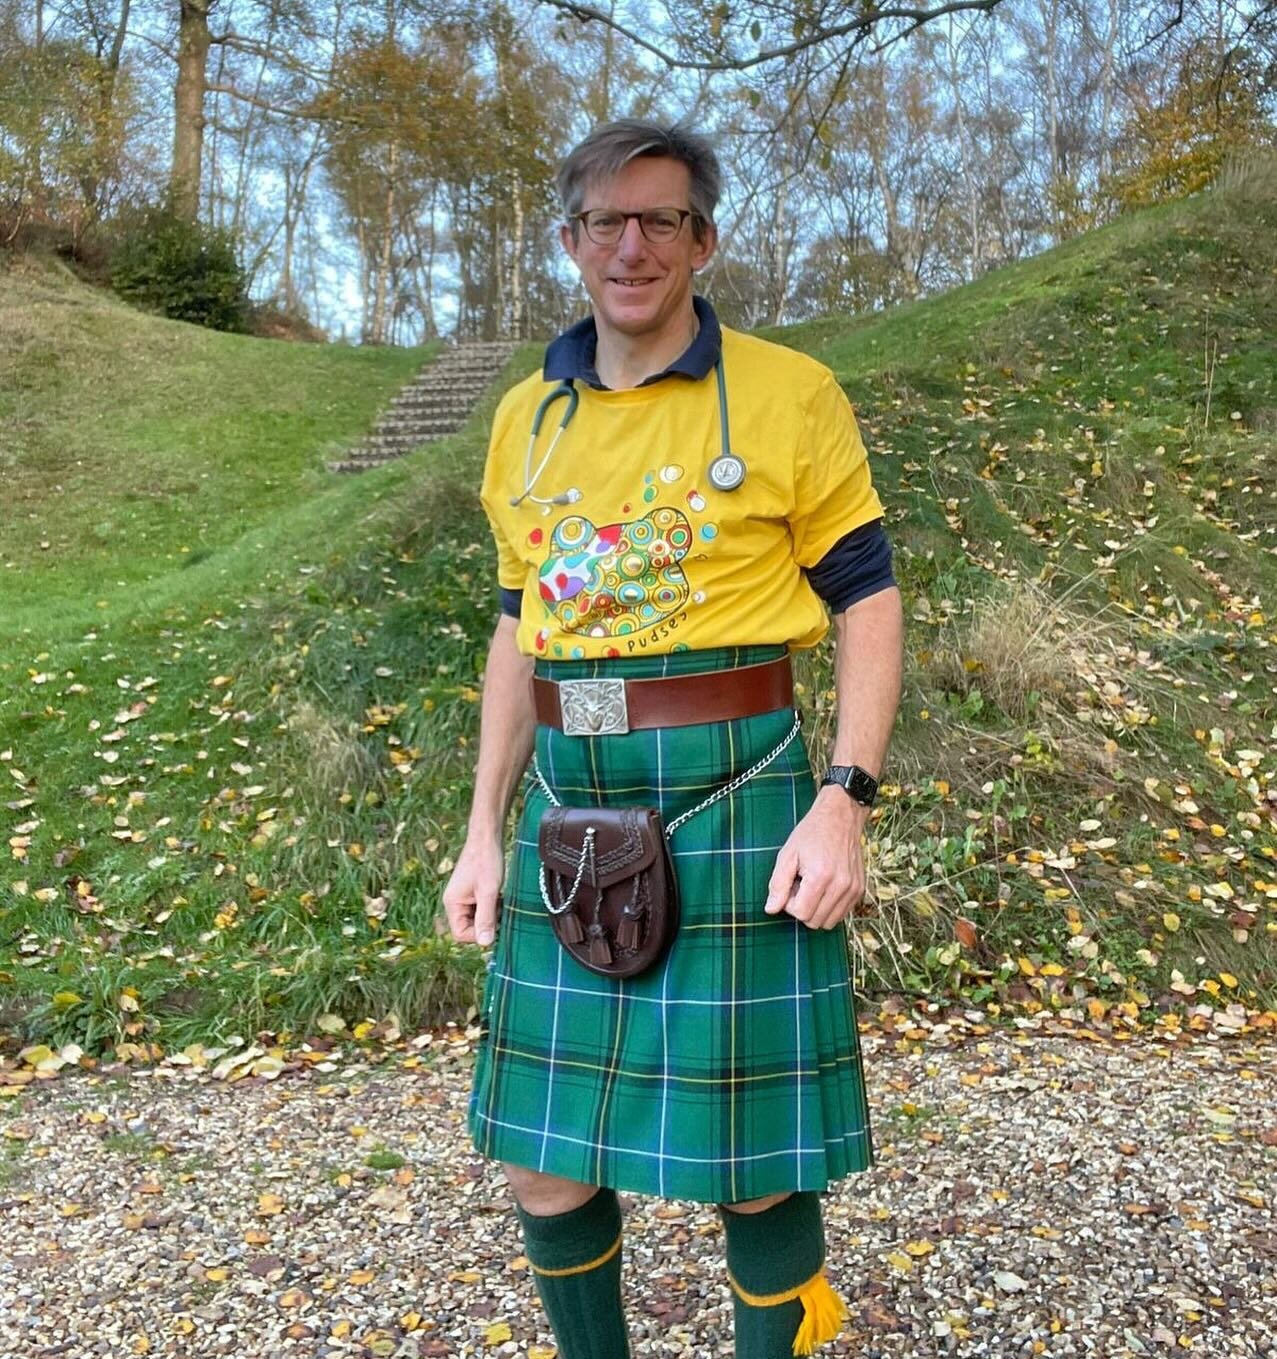 We all  love a great fundraiser for charity! 

What better than supporting our young people across the UK for BBC Children in need. 

@chriswtufnell @coachhousevetsequine will be turning up to treat your horses in this rather fetching attire 🏴󠁧󠁢󠁳